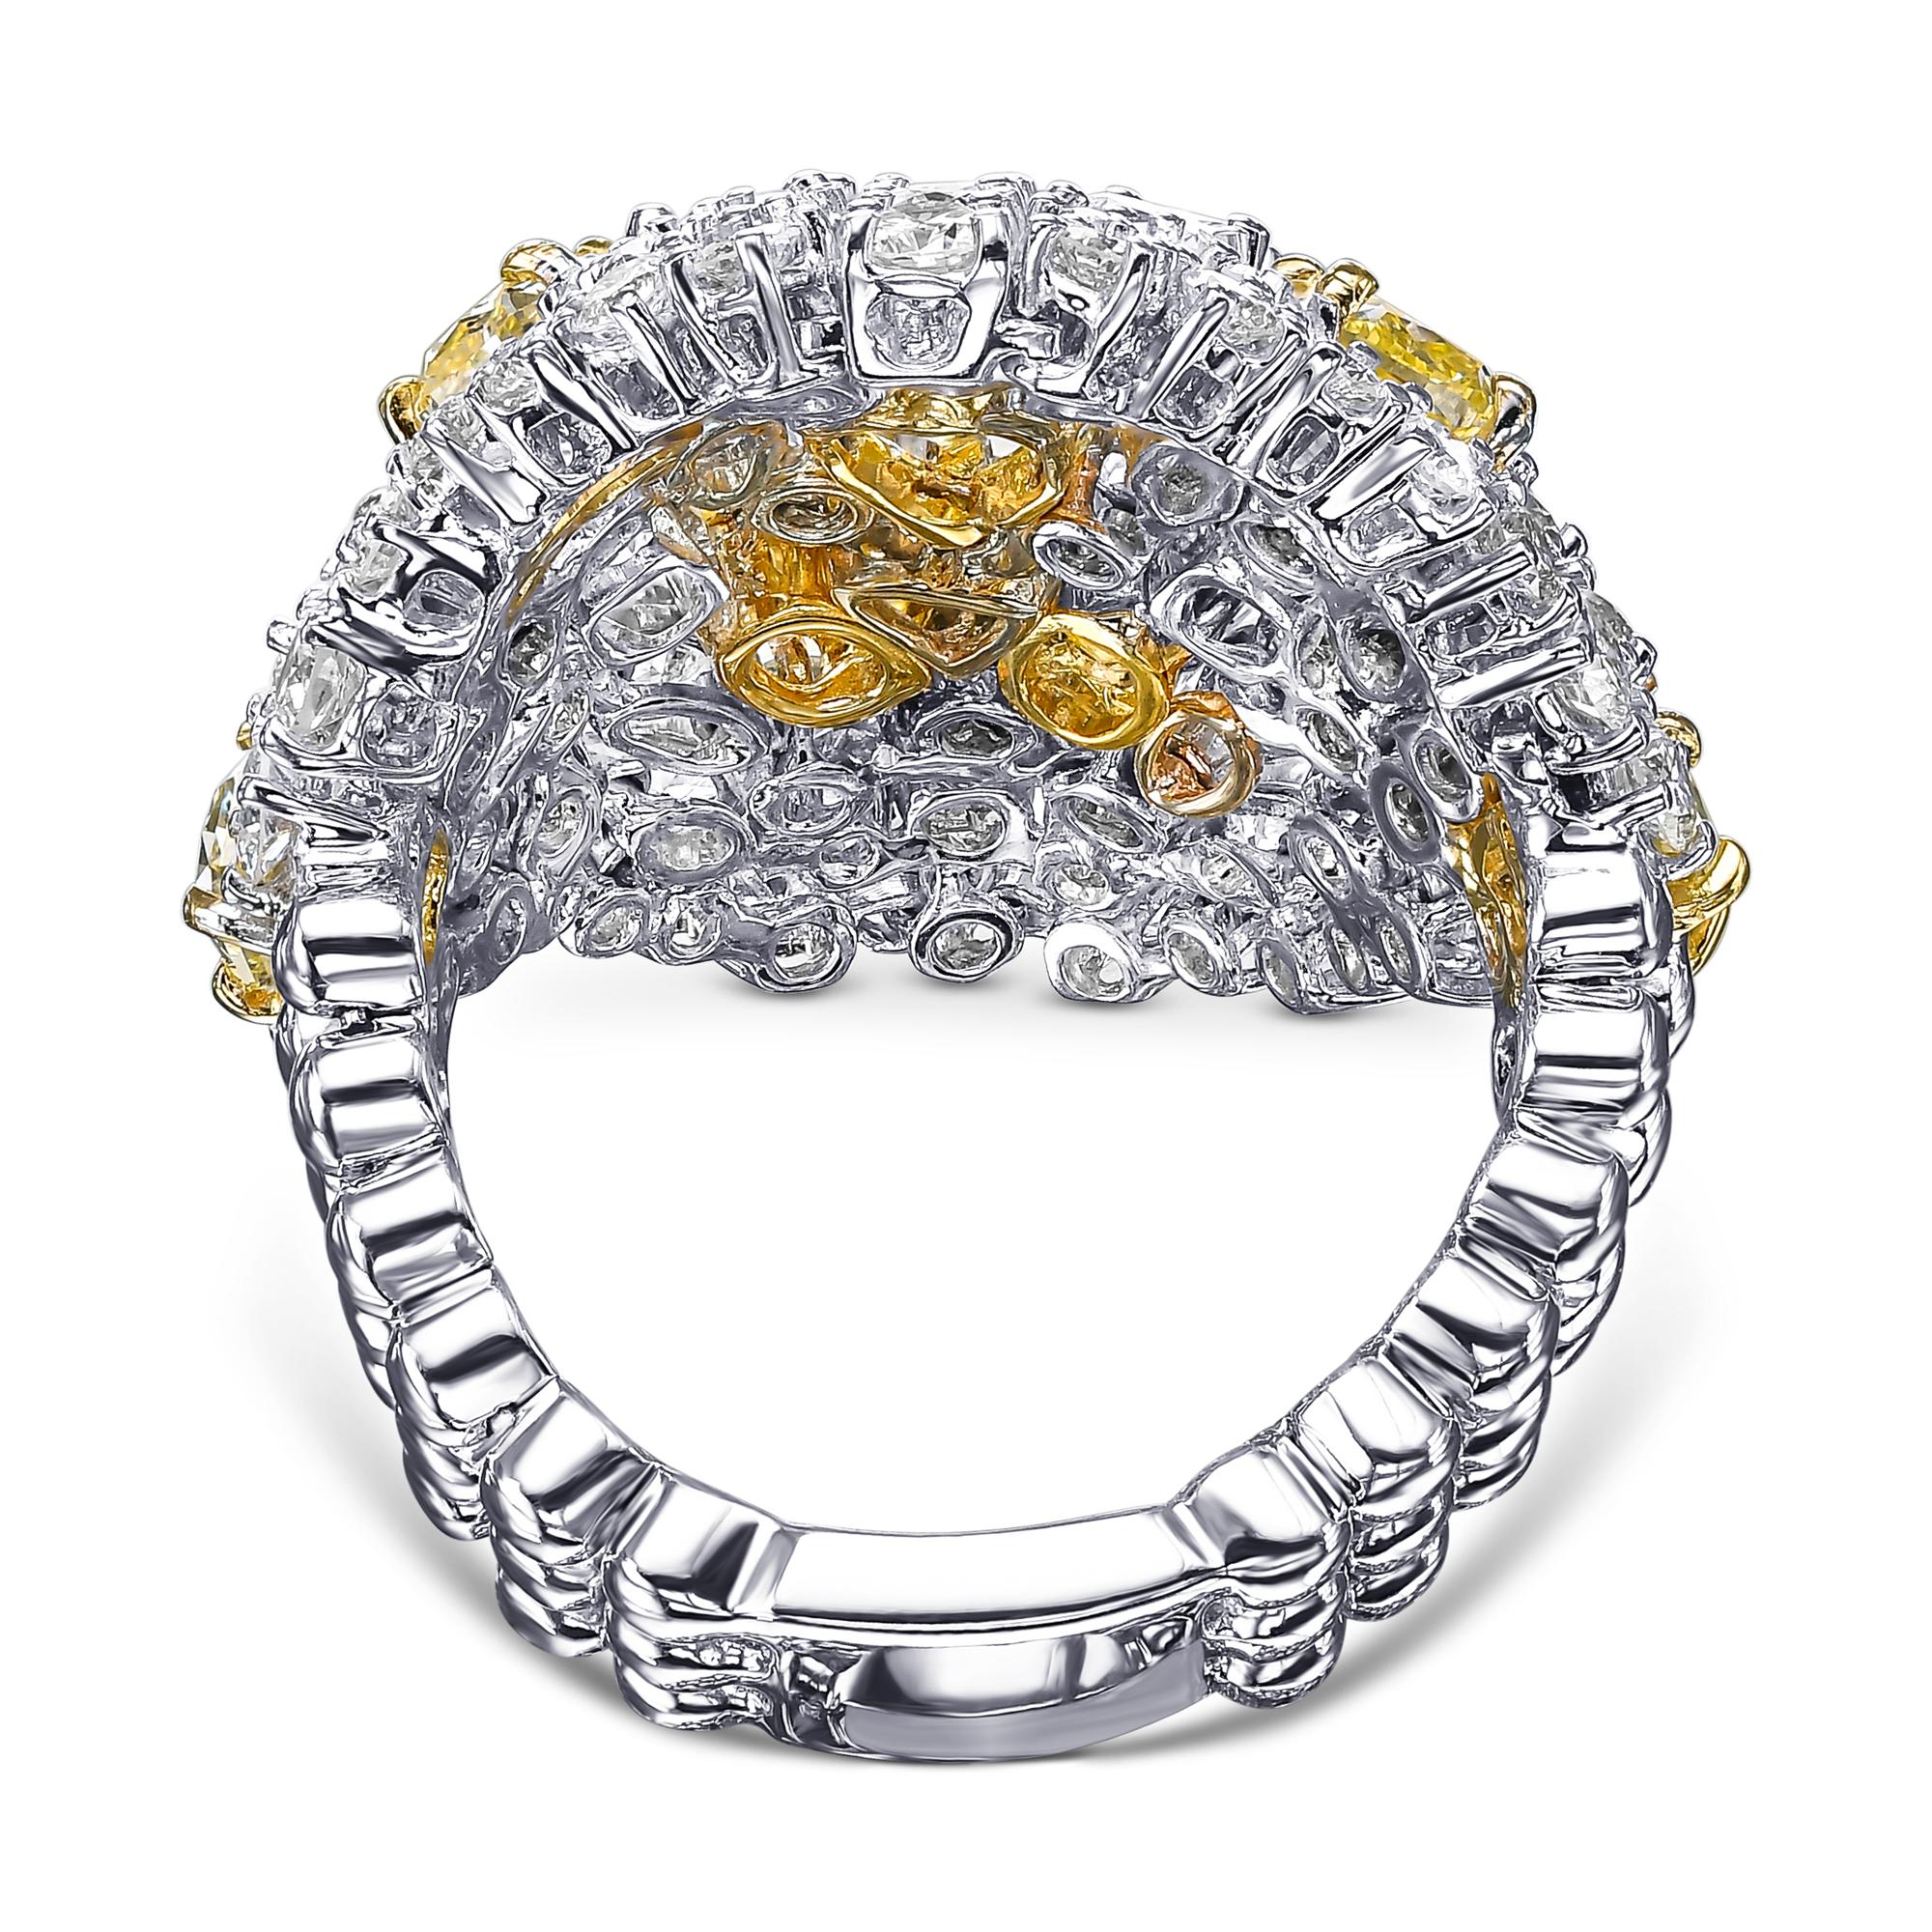 One 18K/750 white gold ring, set with 11 natural fancy yellow diamonds accented by 62 colorless diamonds. A perfect gift for yourself or your loved one!
Center stone is 1ct!

Center Stone:
___________
Natural Diamond
Cut: Multiple Shapes
Carat: 